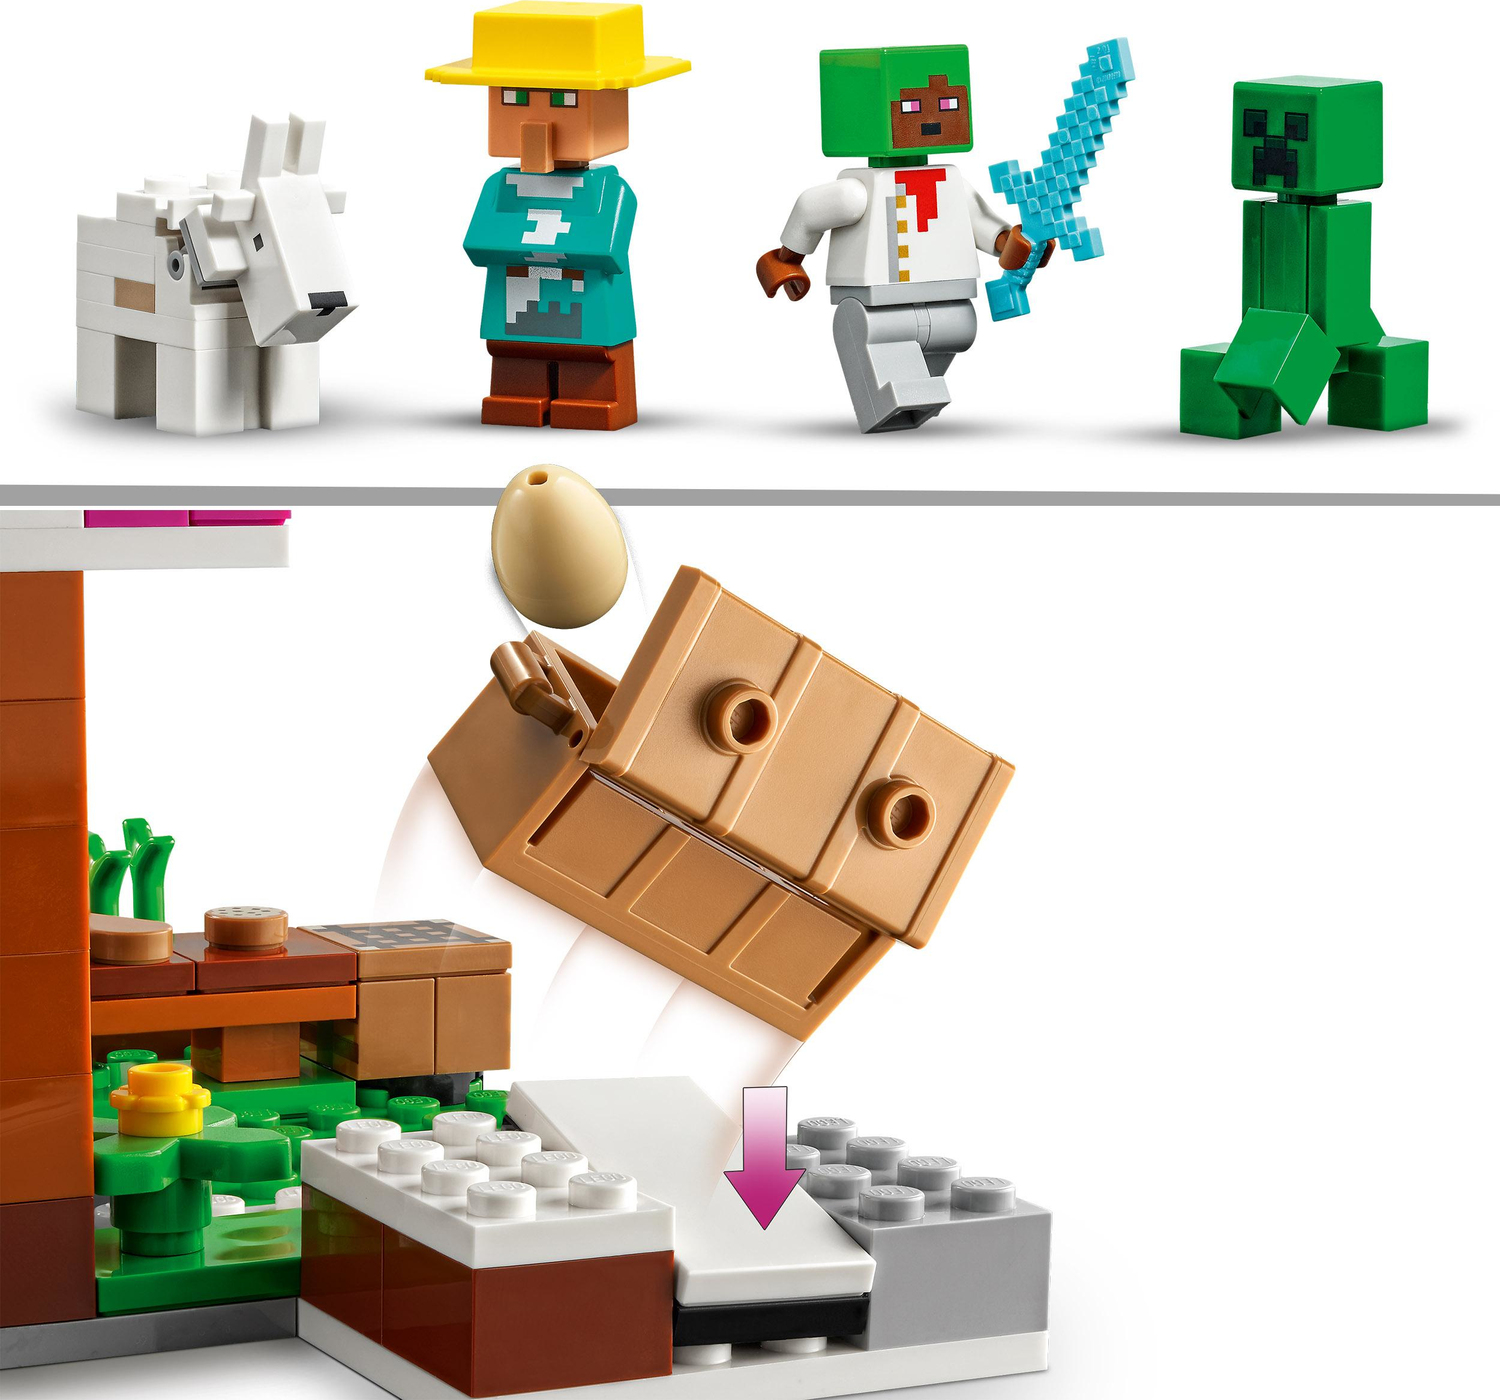 LEGO Minecraft The Bakery Building Kit 21184 Game-Inspired Minecraft Toy  Set for Kids Girls Boys Age 8+ Featuring 3 Minecraft Figures and Goat, with